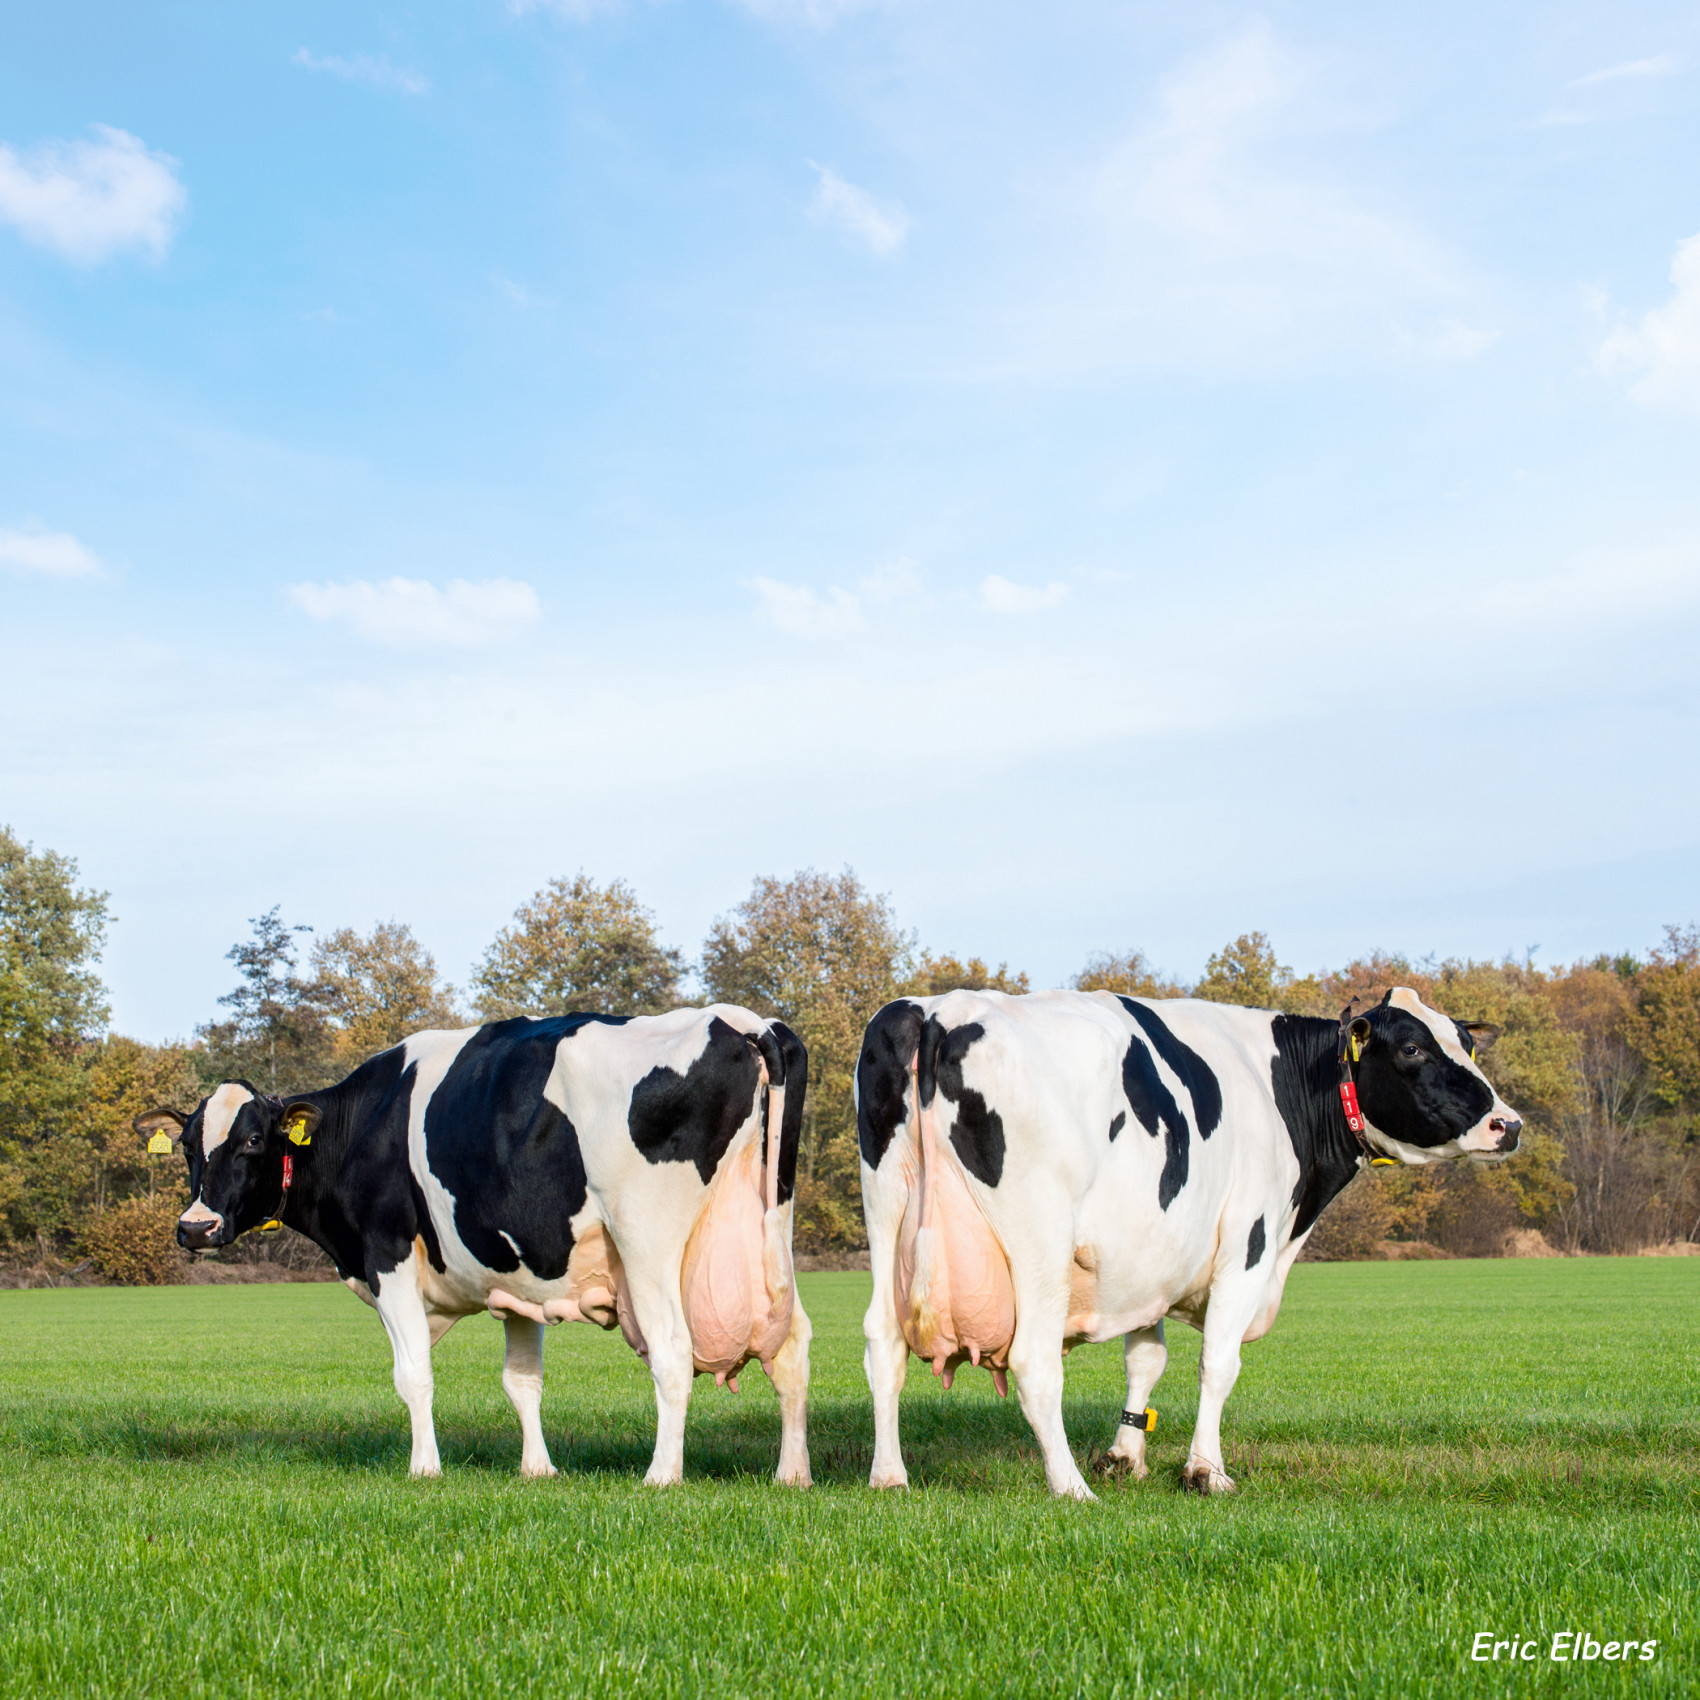 Two cows in grassland